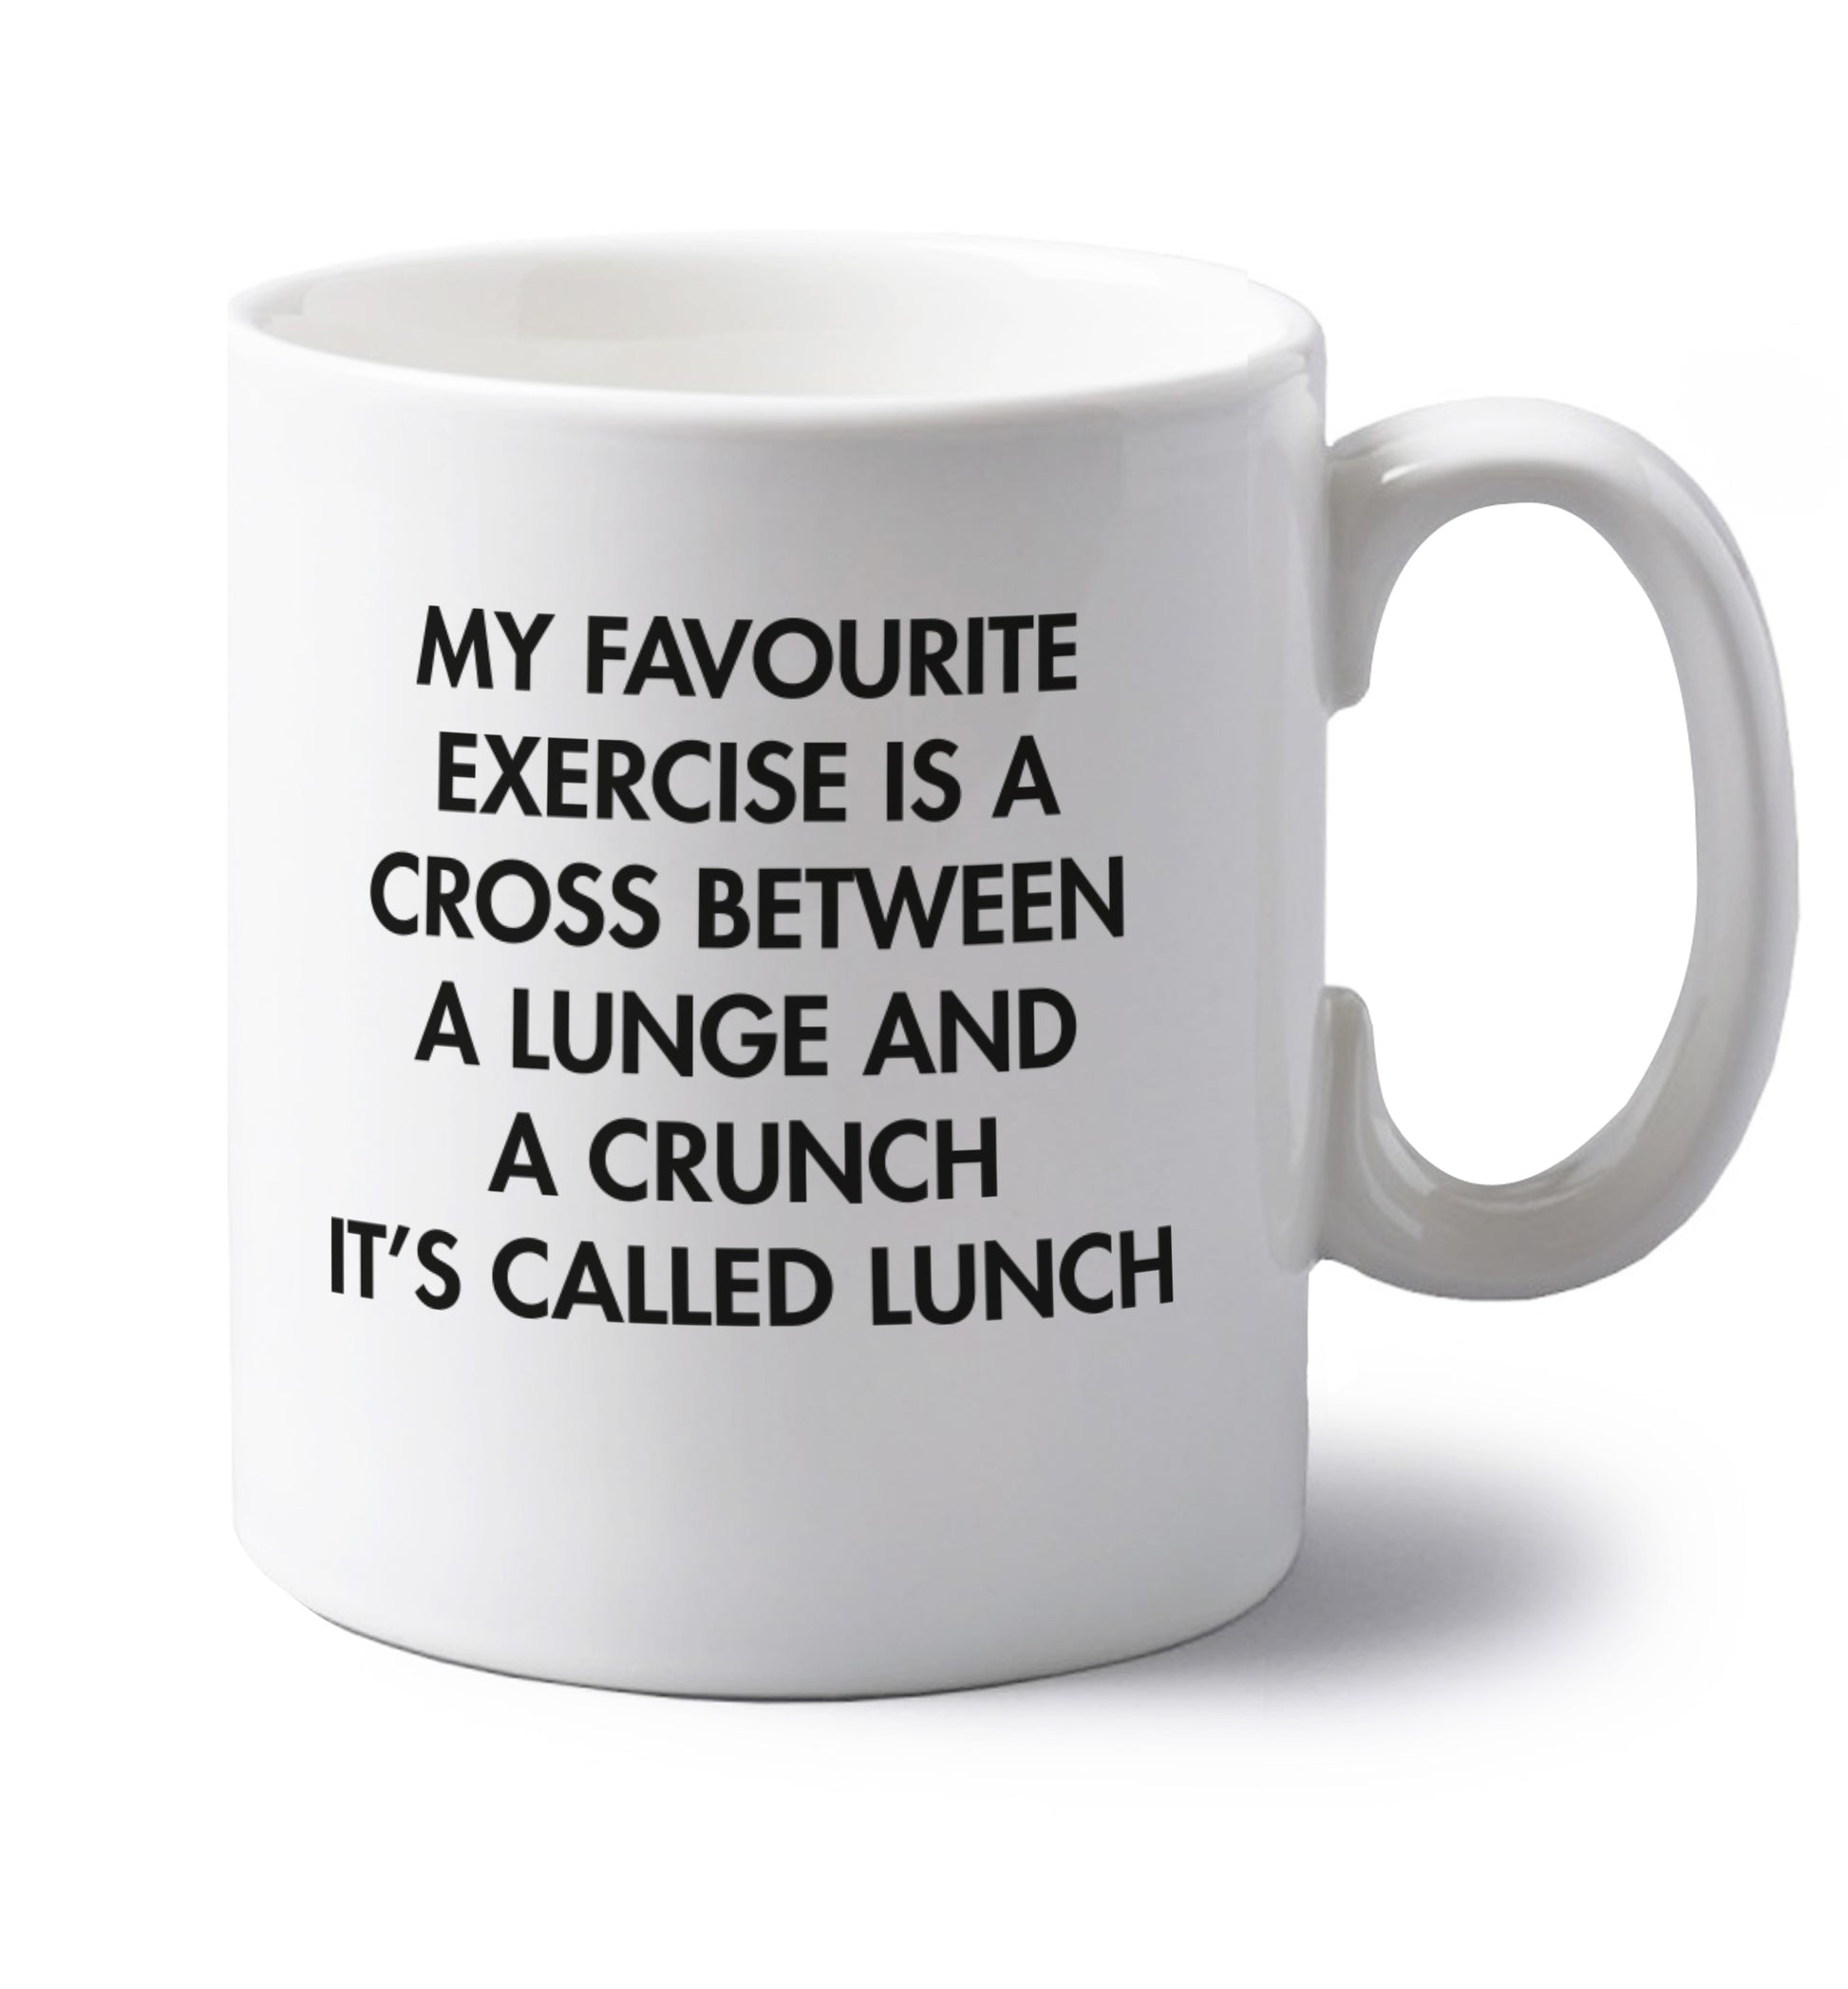 My favourite exercise is a cross between a lung and a crunch it's called lunch left handed white ceramic mug 